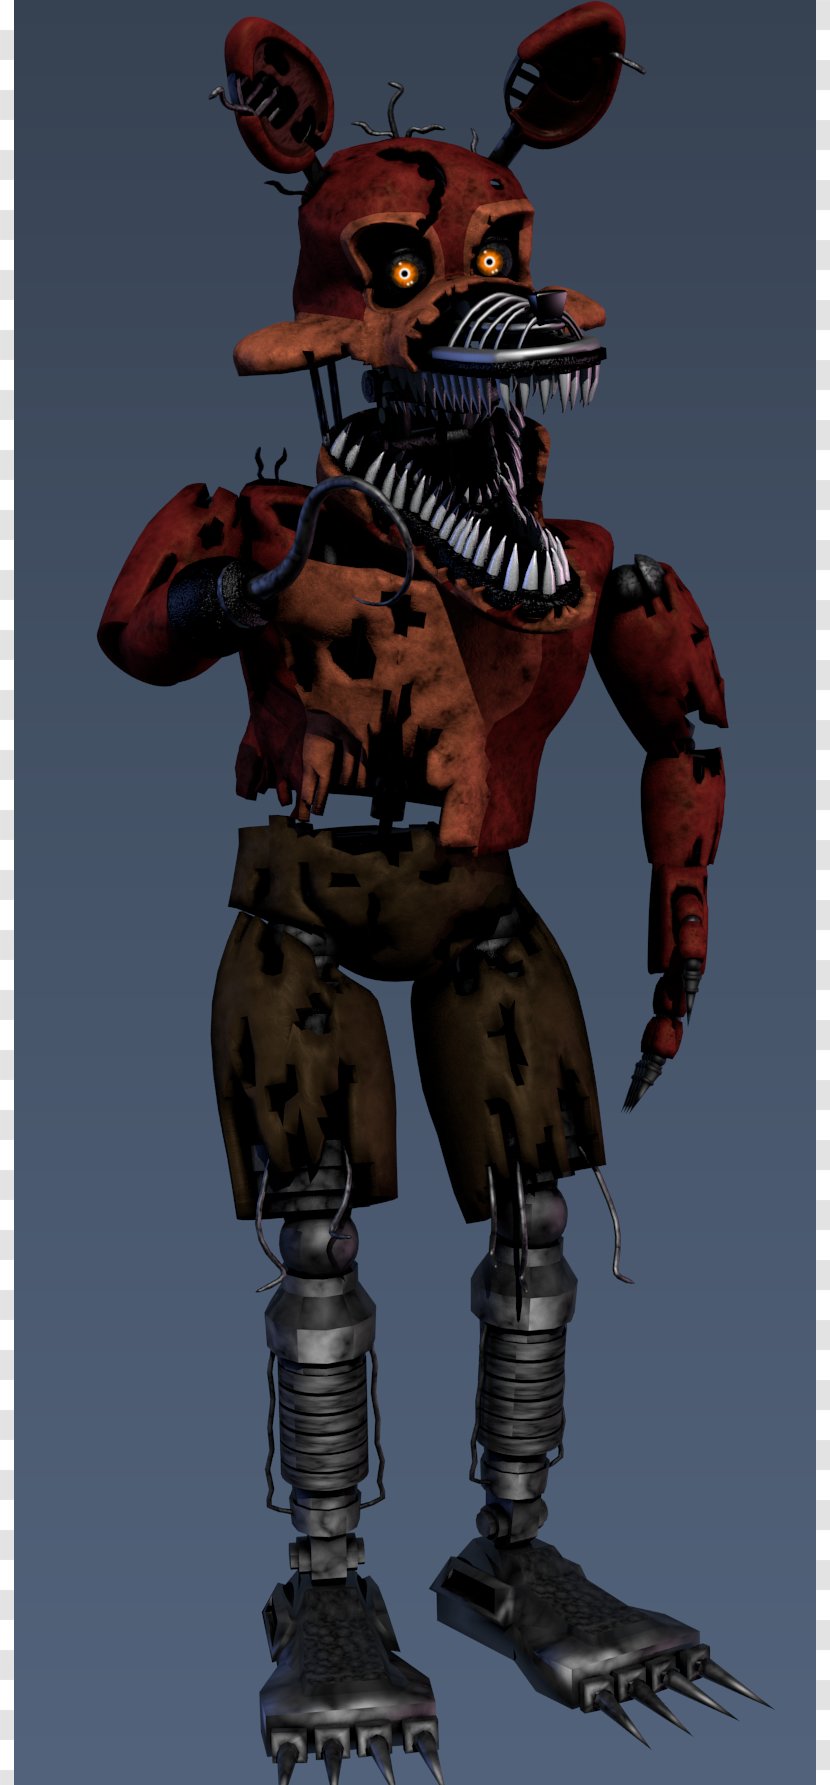 Five Nights At Freddy's 4 DeviantArt Drawing - Animatronics - Nightmare Foxy Transparent PNG